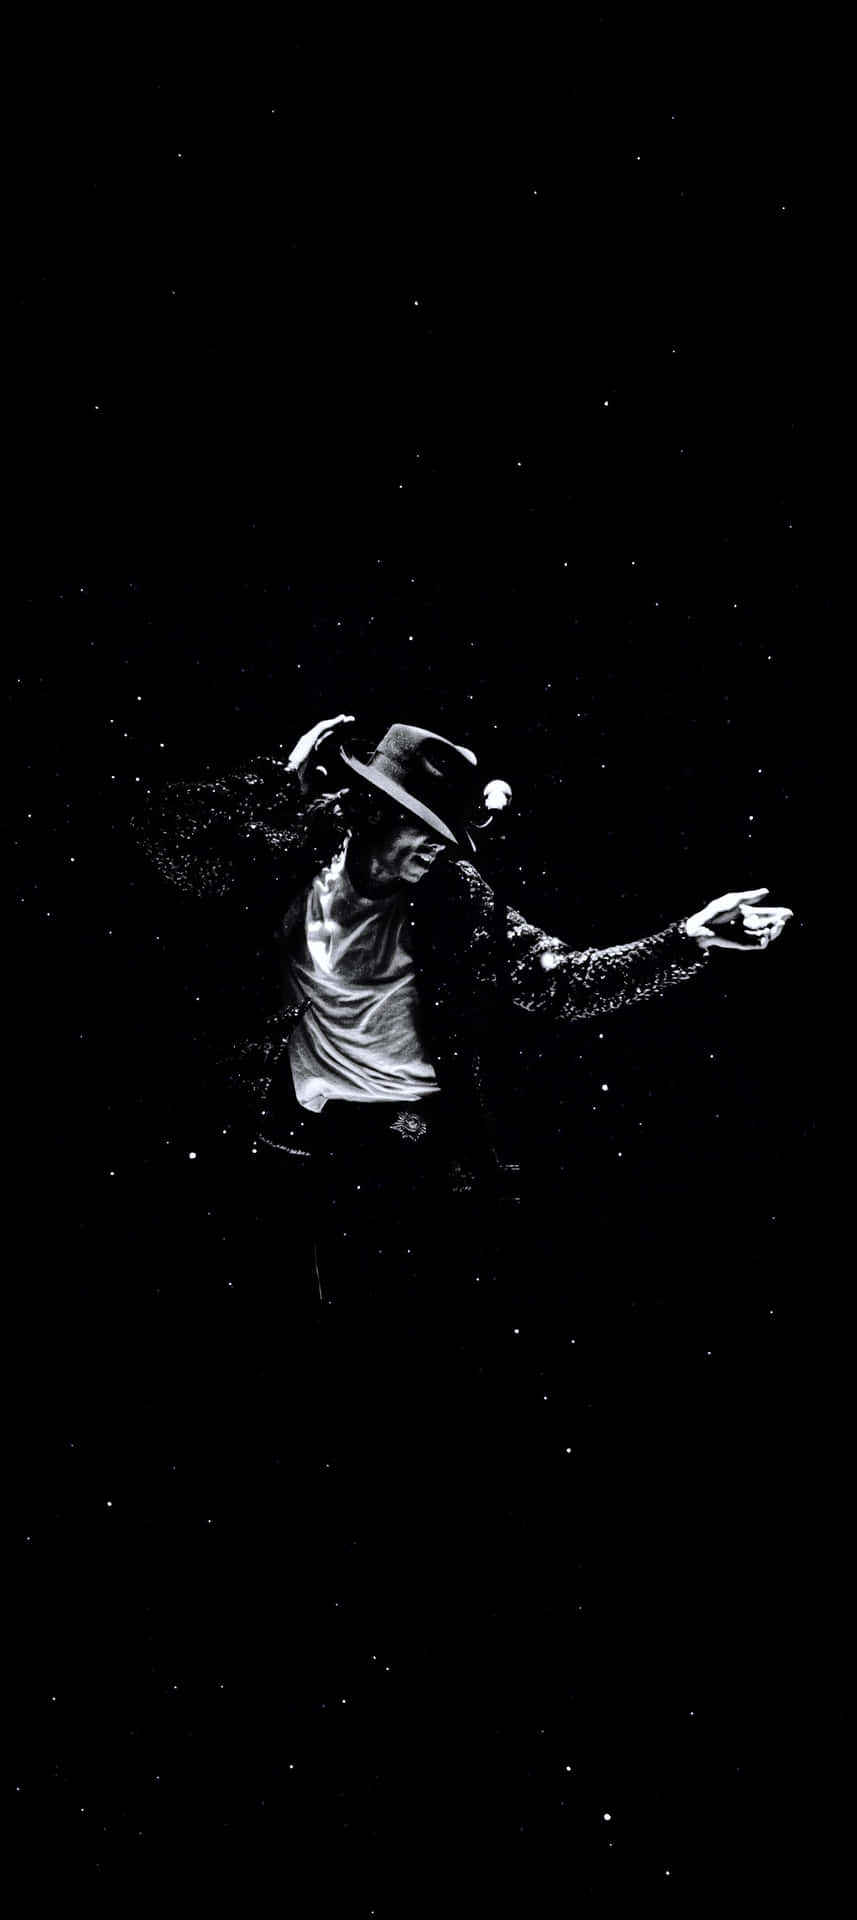 Jazz up your life with a Michael Jackson themed Iphone Wallpaper